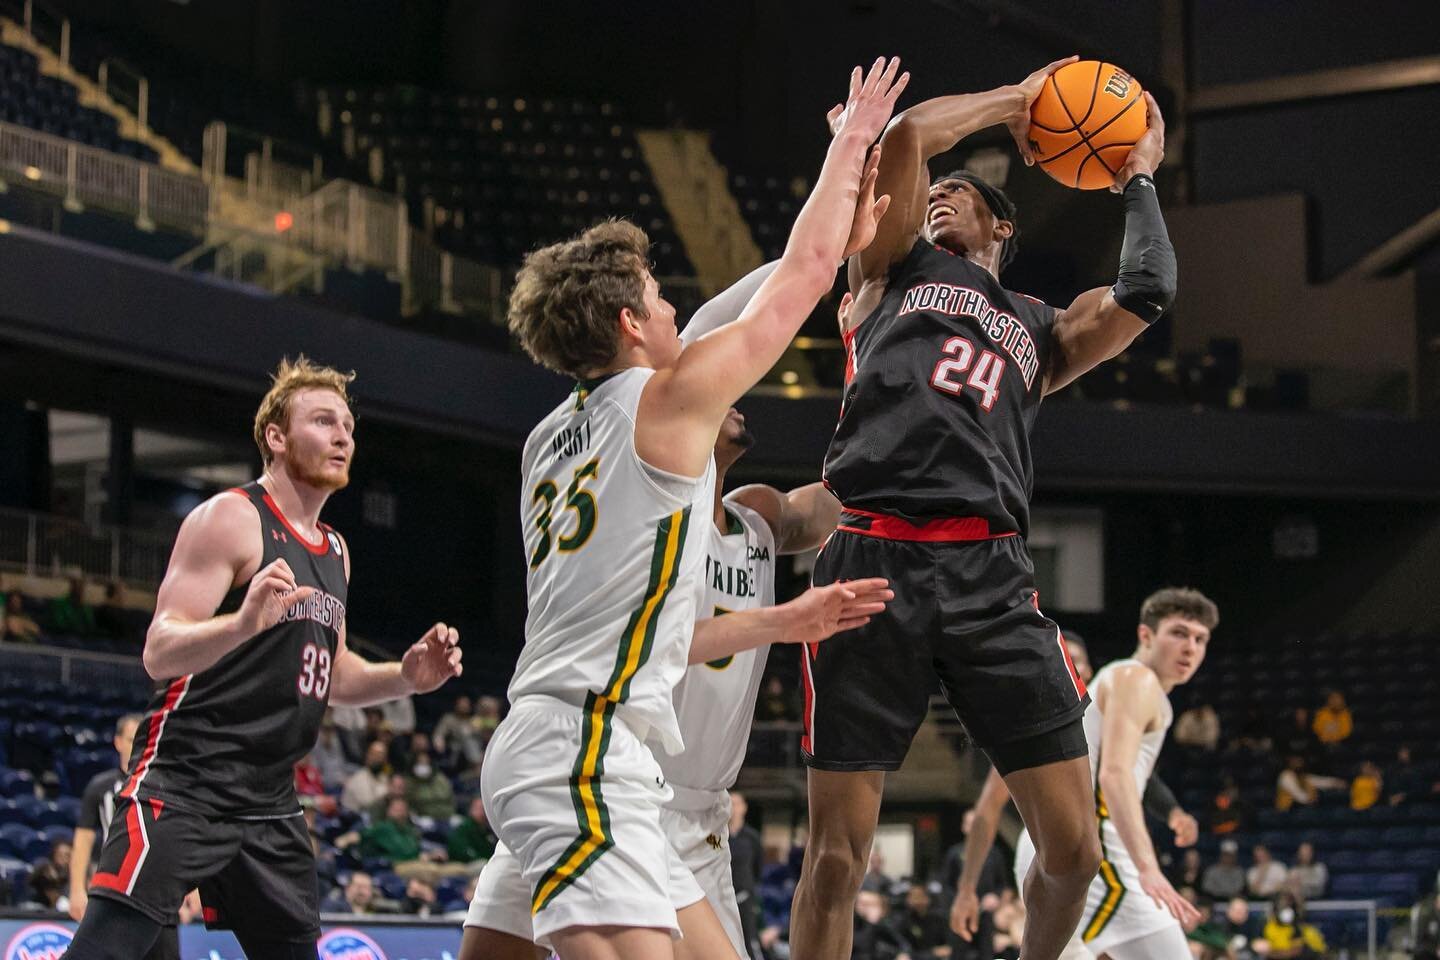 Some of my favorites from yesterday&rsquo;s @gonumbasketball win over William &amp; Mary.
&bull;
&bull;
&bull;
#basketball #basketballphotography #basketballphotographer #caasports #caabasketball #caa #caatournament #howlinhuskies #northeasternuniver